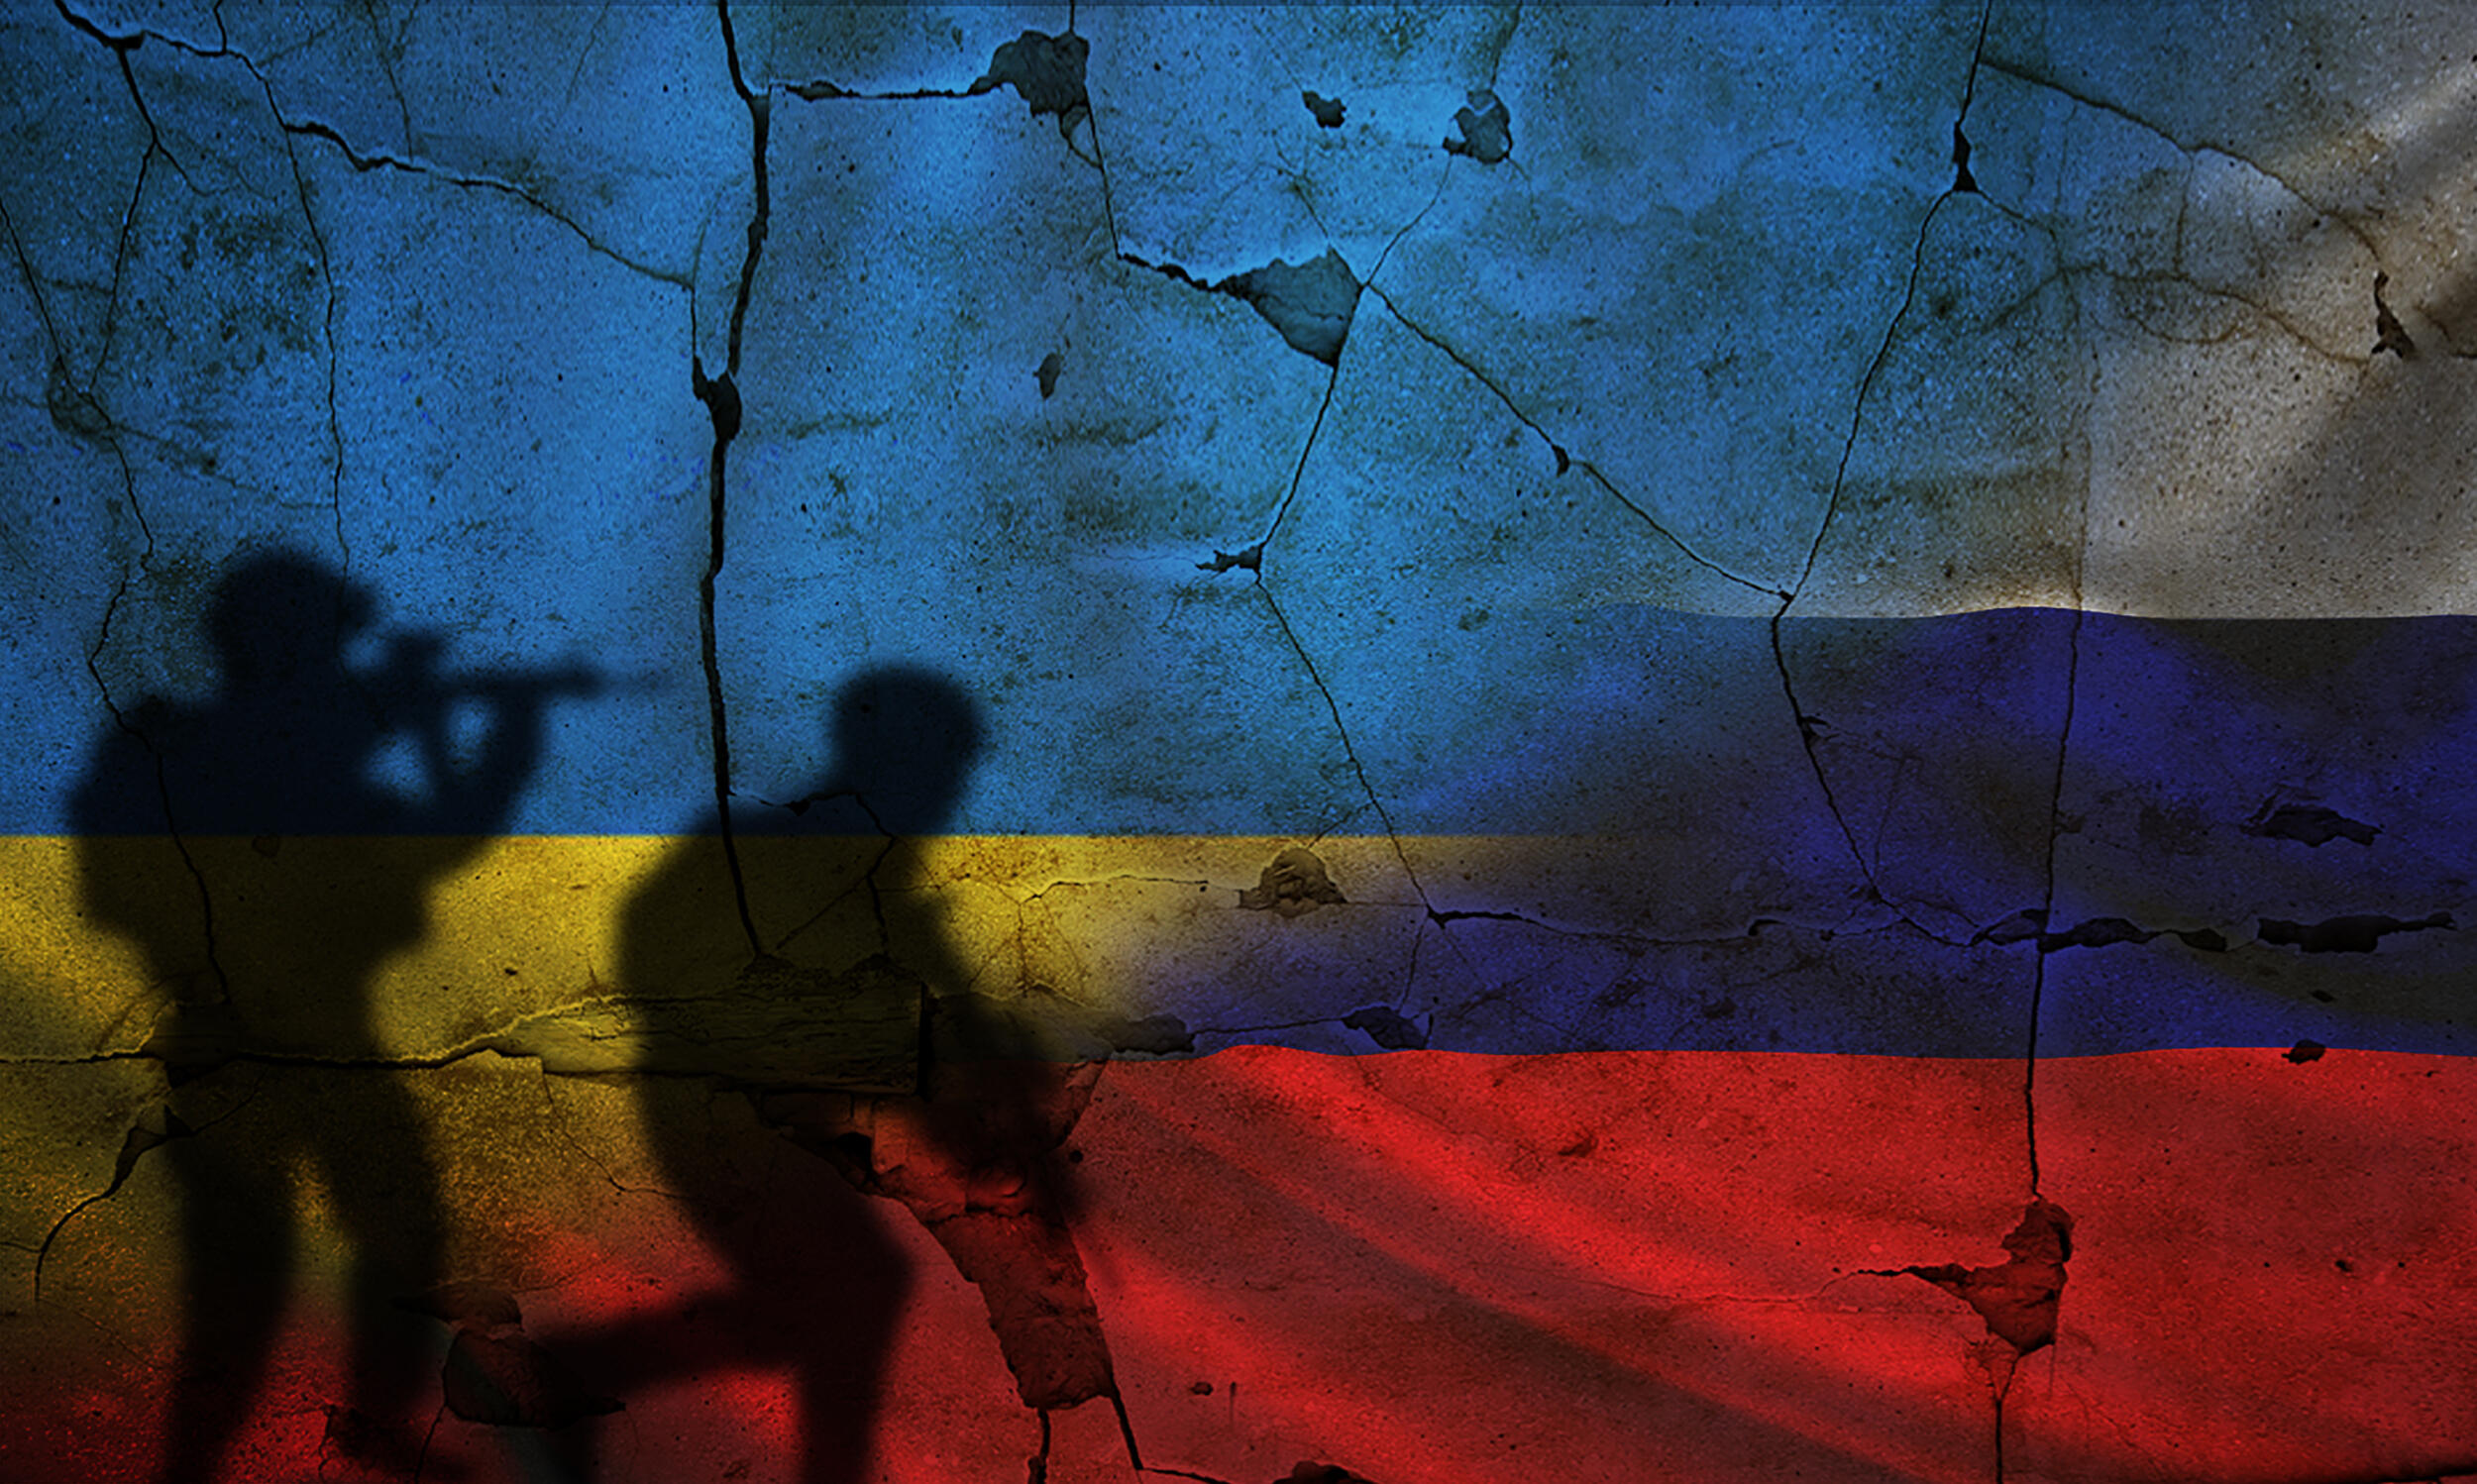 Black silhouettes of two soldiers holding guns in front a cracked brick wall. Half of the wall has the image of the Ukrainian flag and the other half has the Russian flag. 